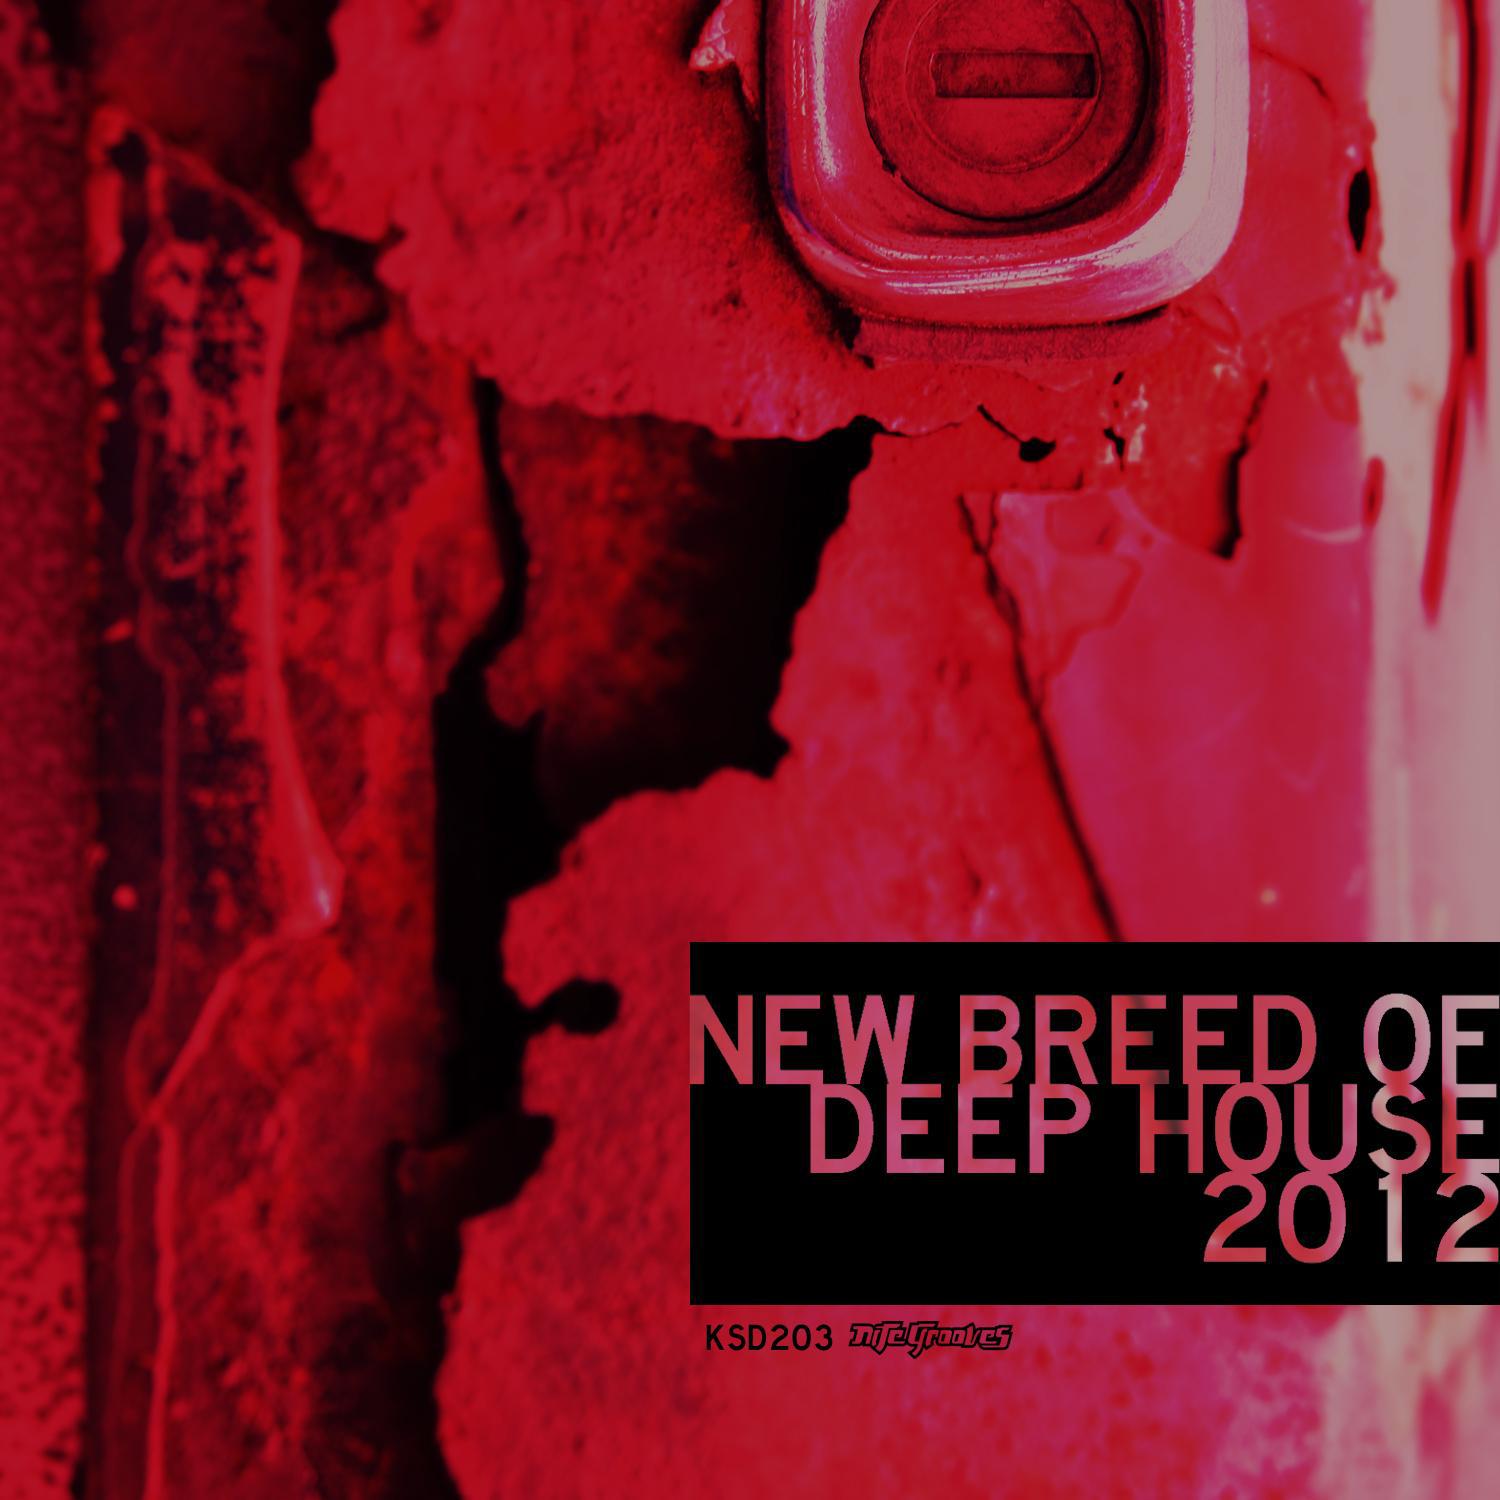 New Breed of Deep House 2012